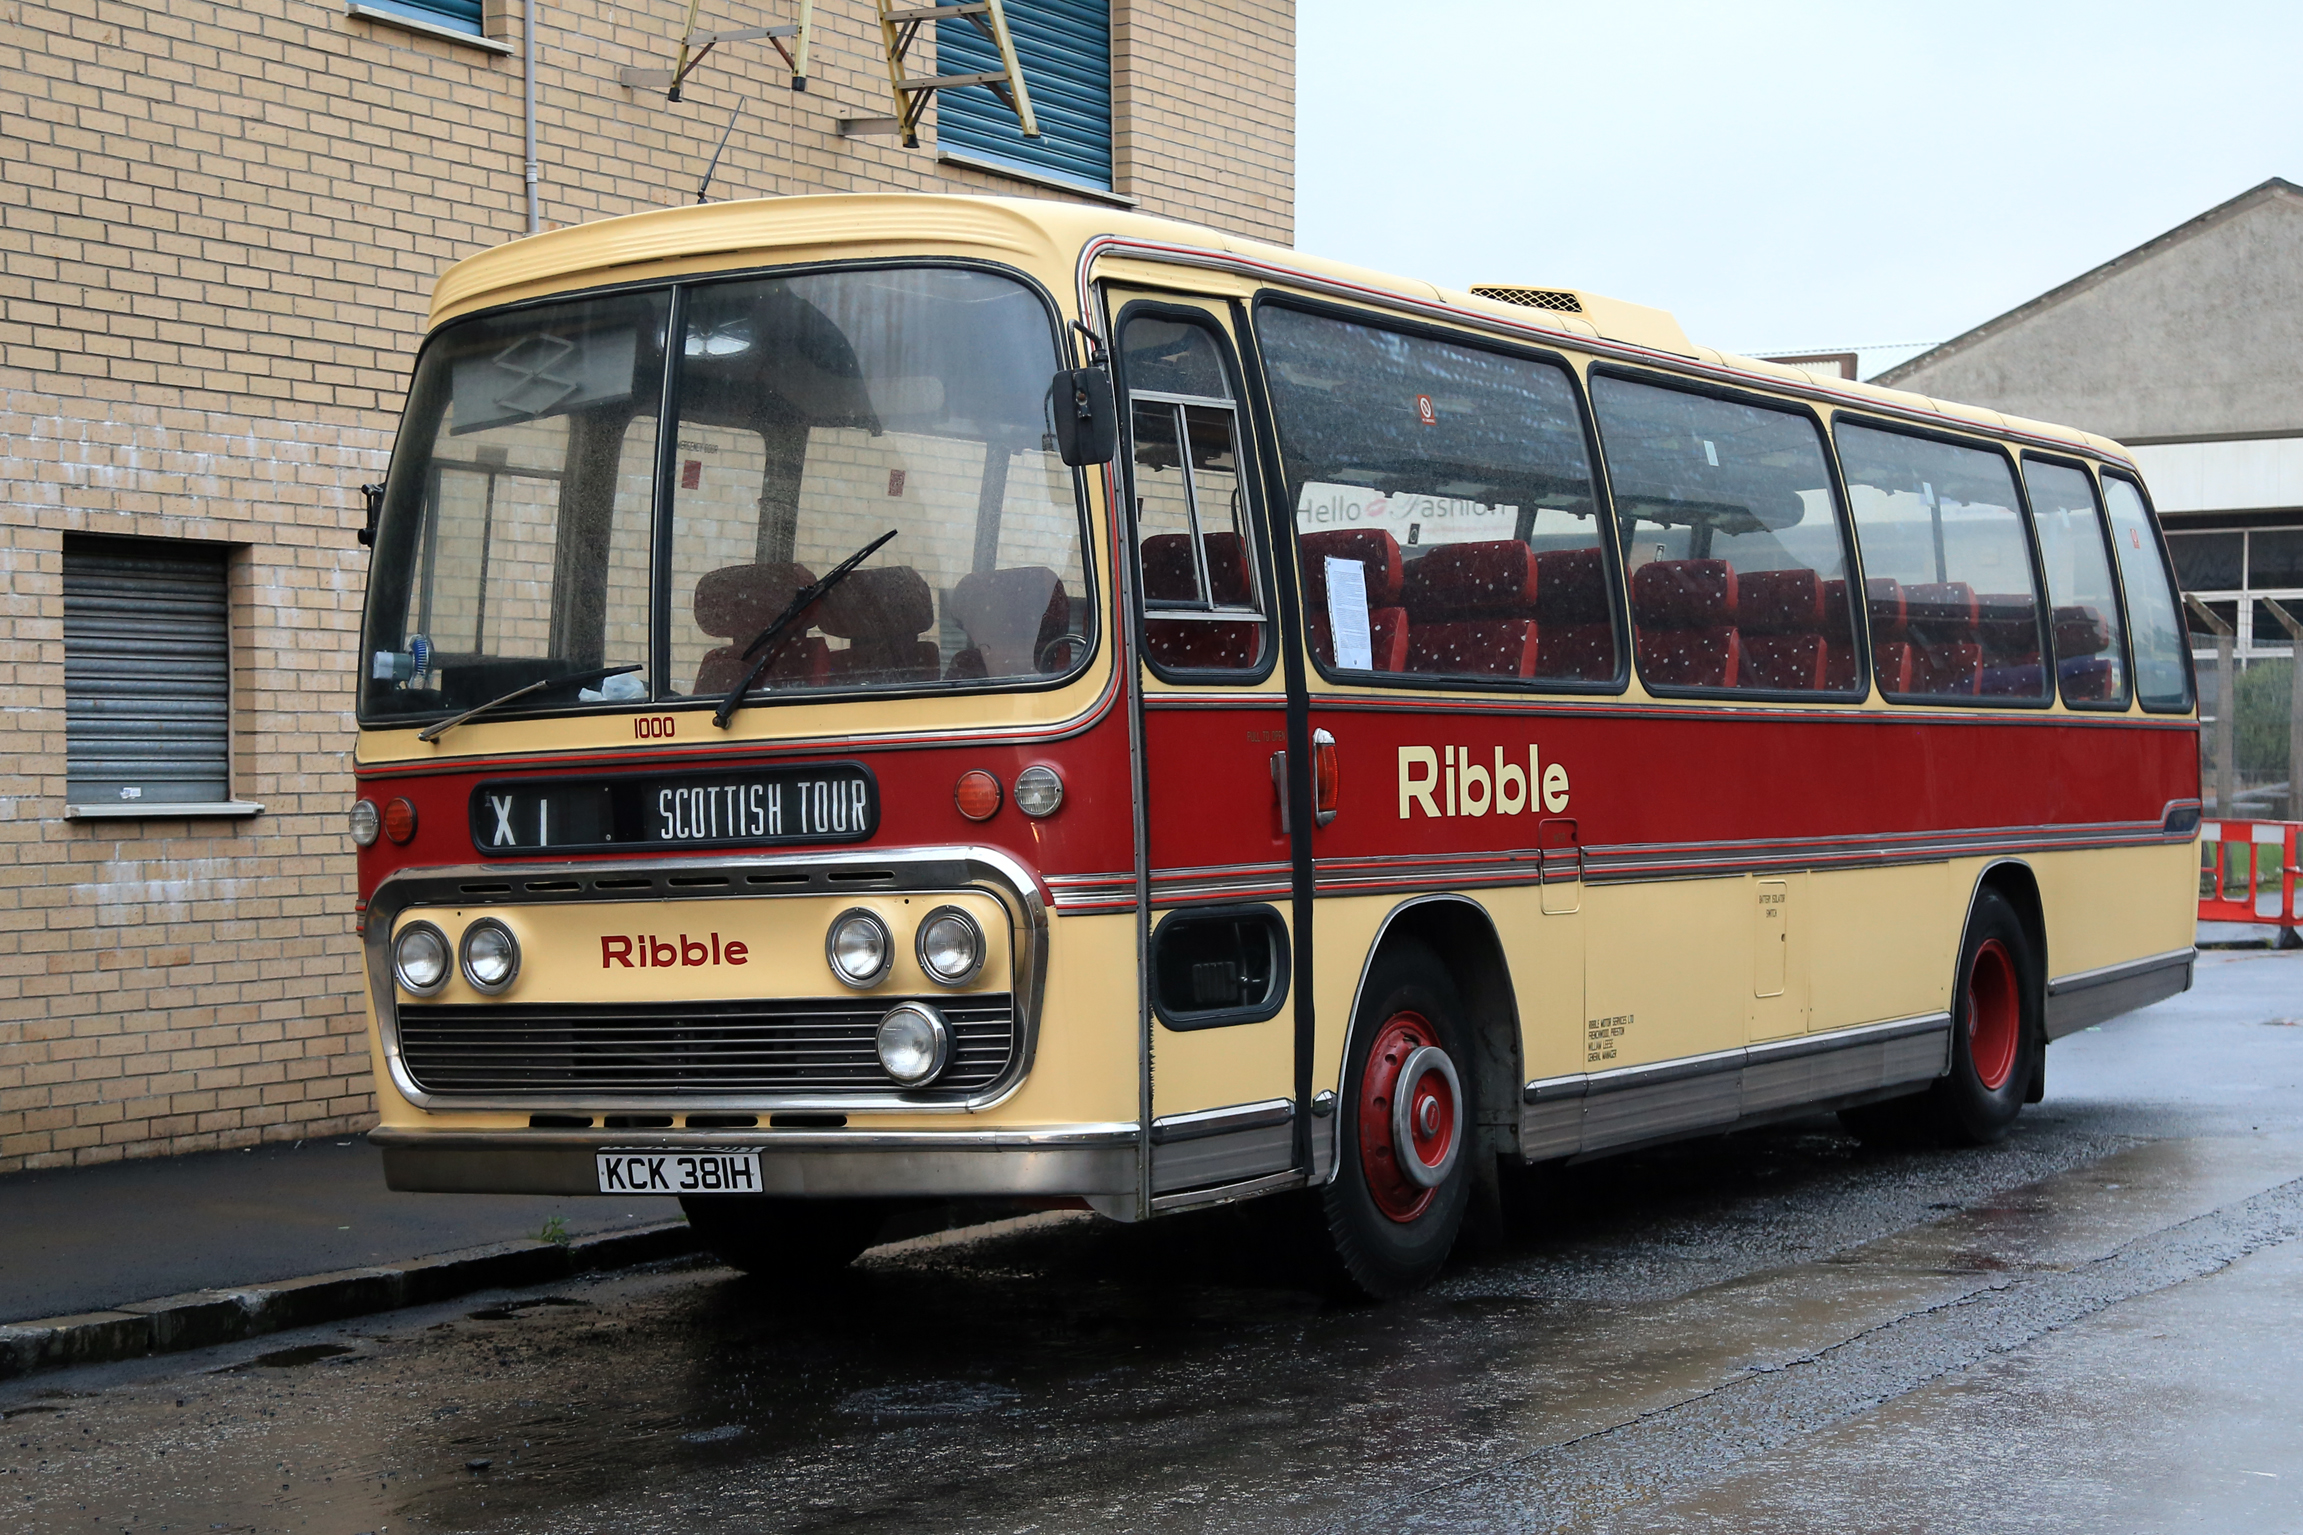 Visiting from Merseyside, restoration of this luxurious Plaxton bodied Leyland Leopard was completed this year with its full Ribble splendour first revealed at the North West Vehicle Restoration Trust event at Kirkby in September